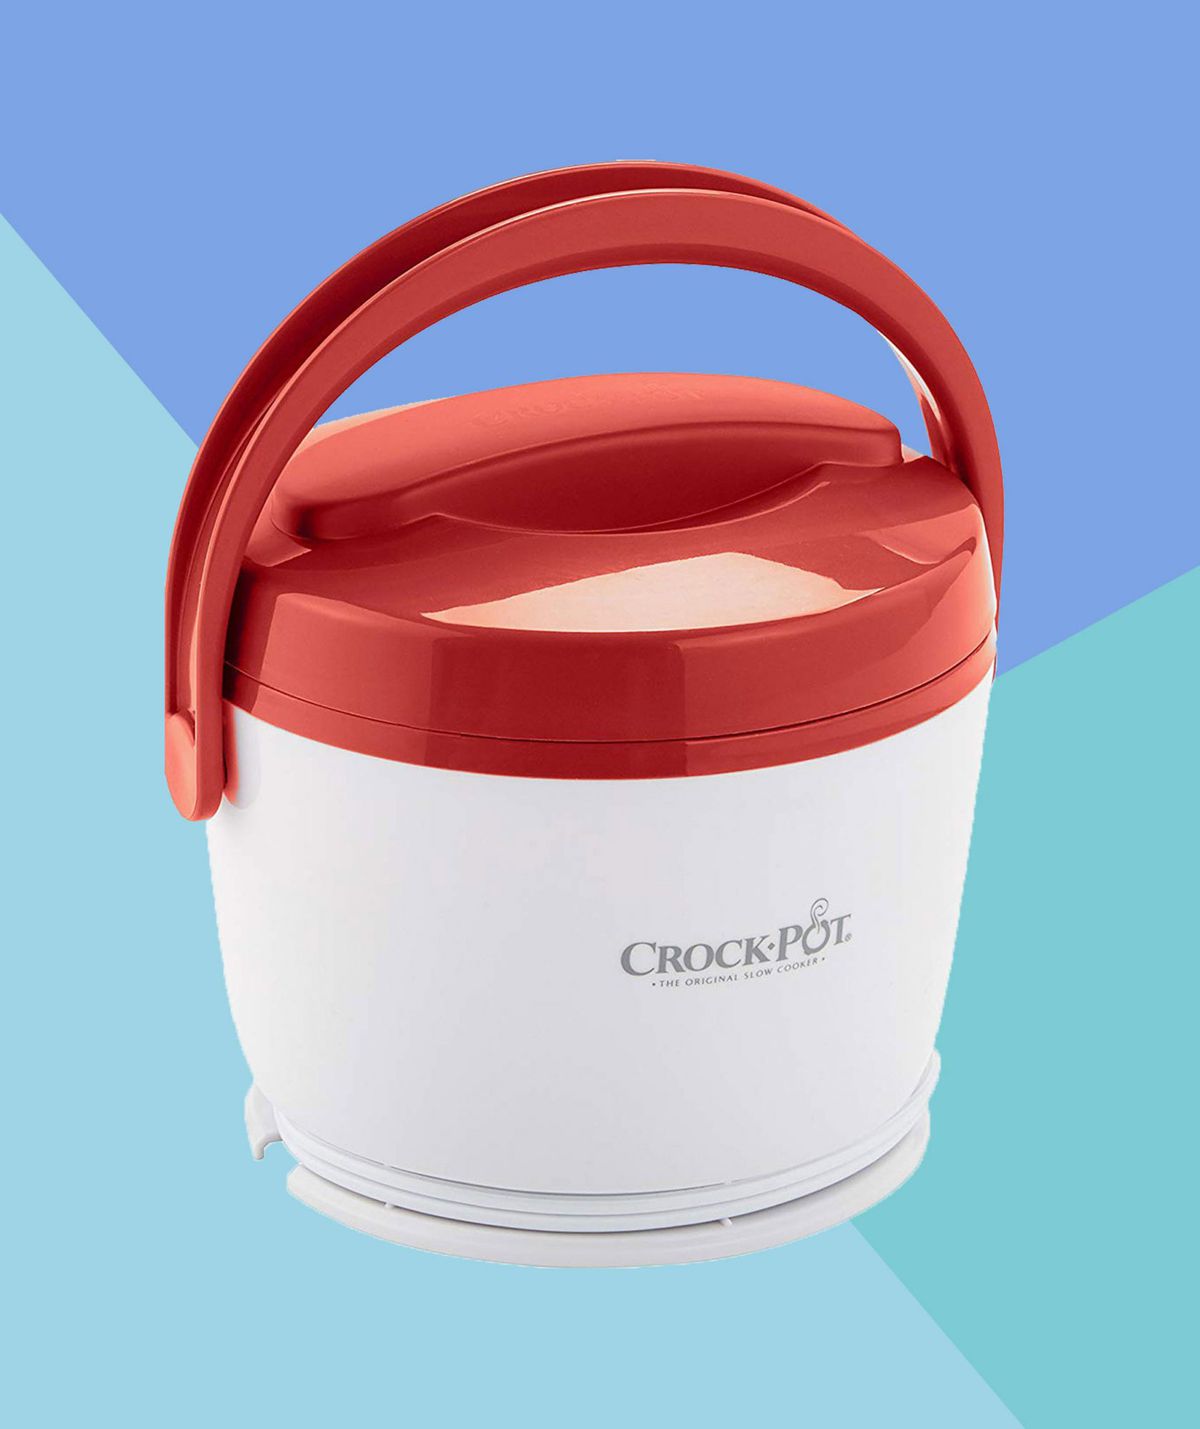 This $22 Mini Crock Pot Is Loved by Amazon Shoppers | Food & Wine